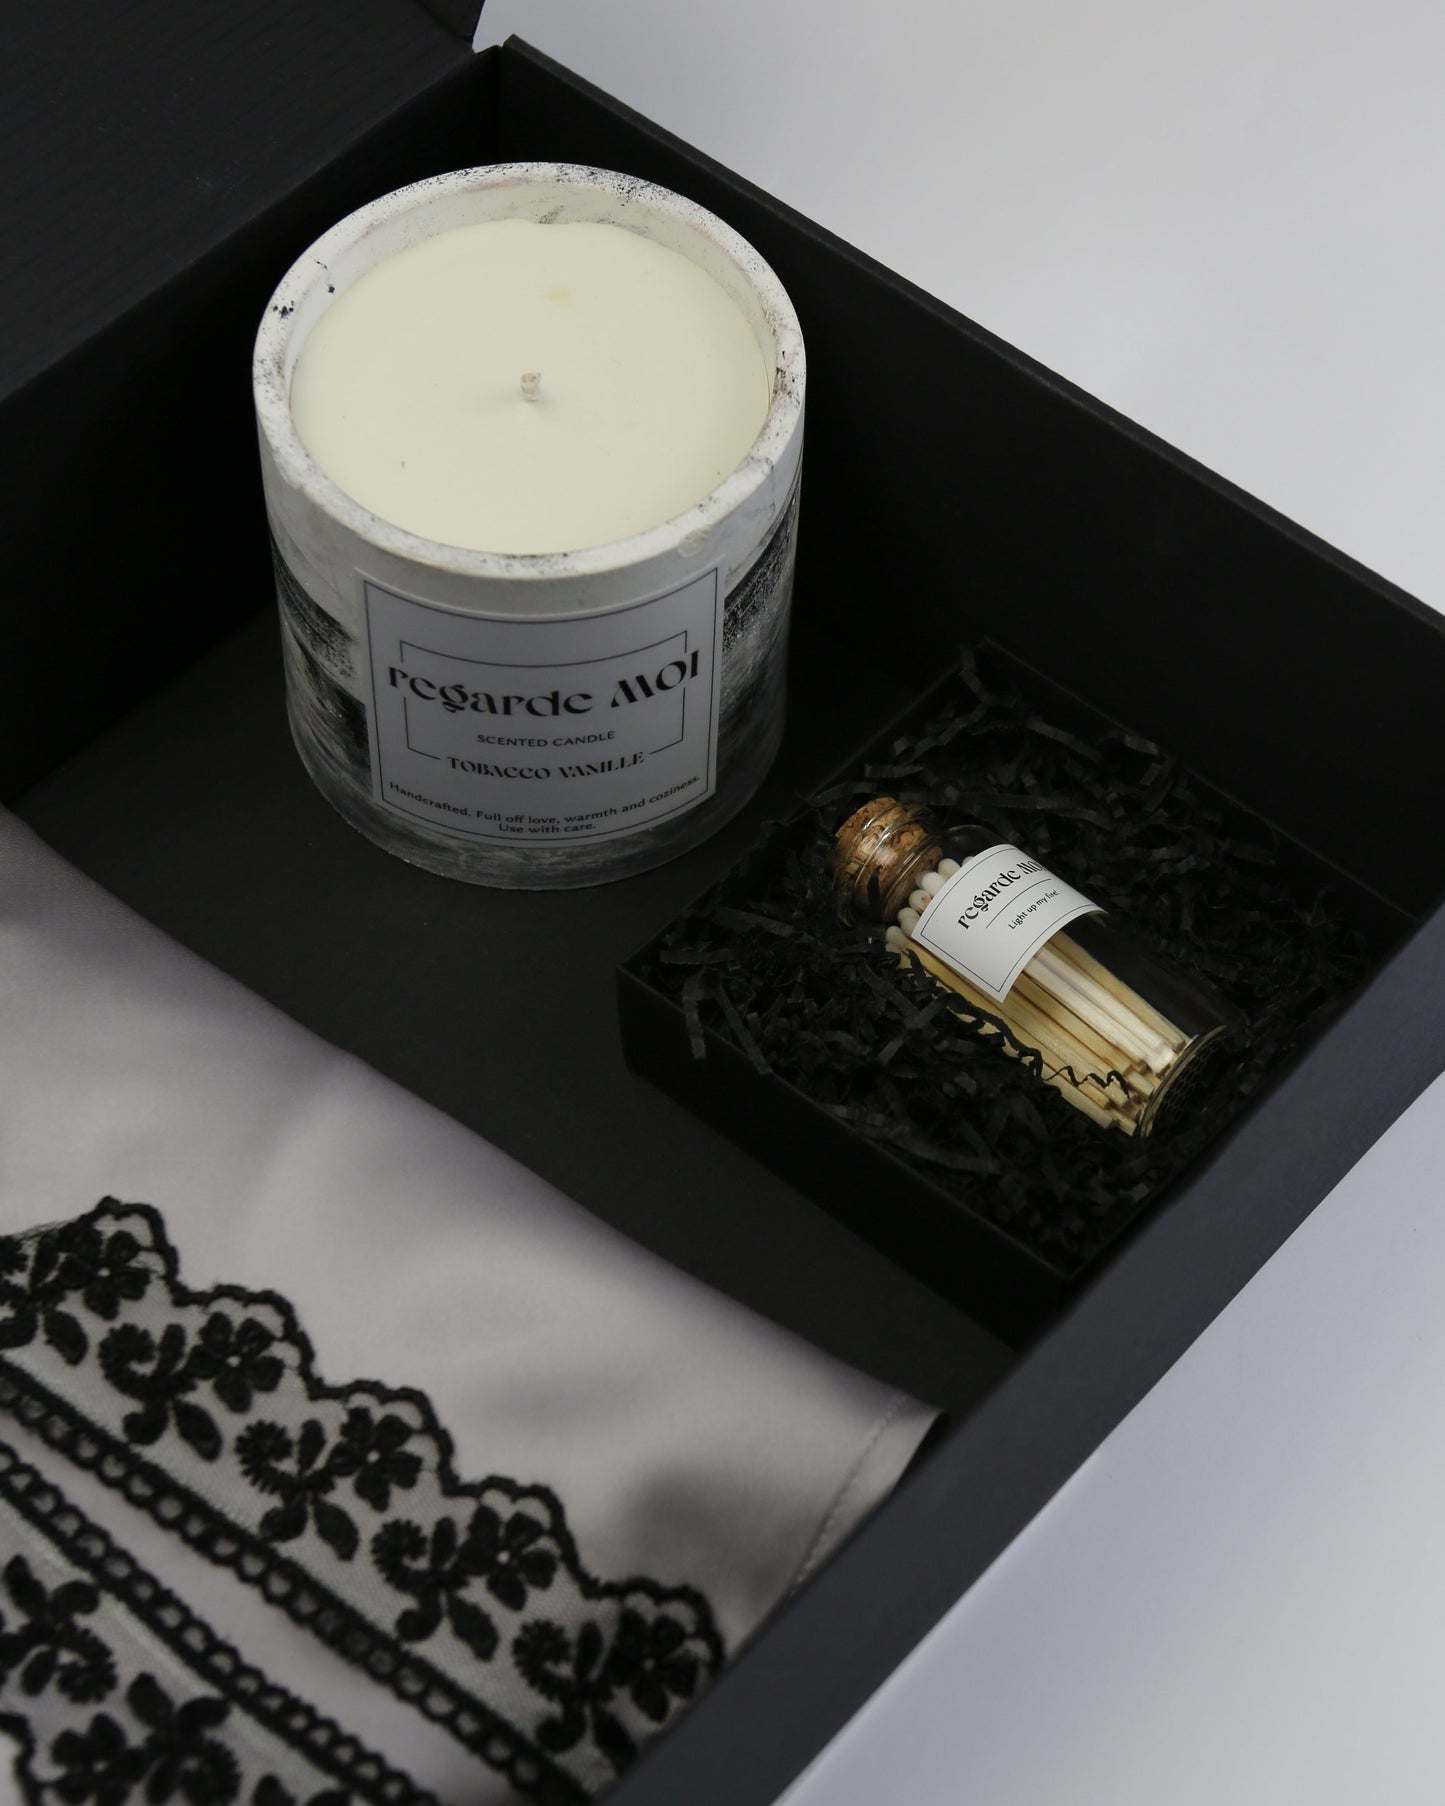 Nightdress and candle gift set